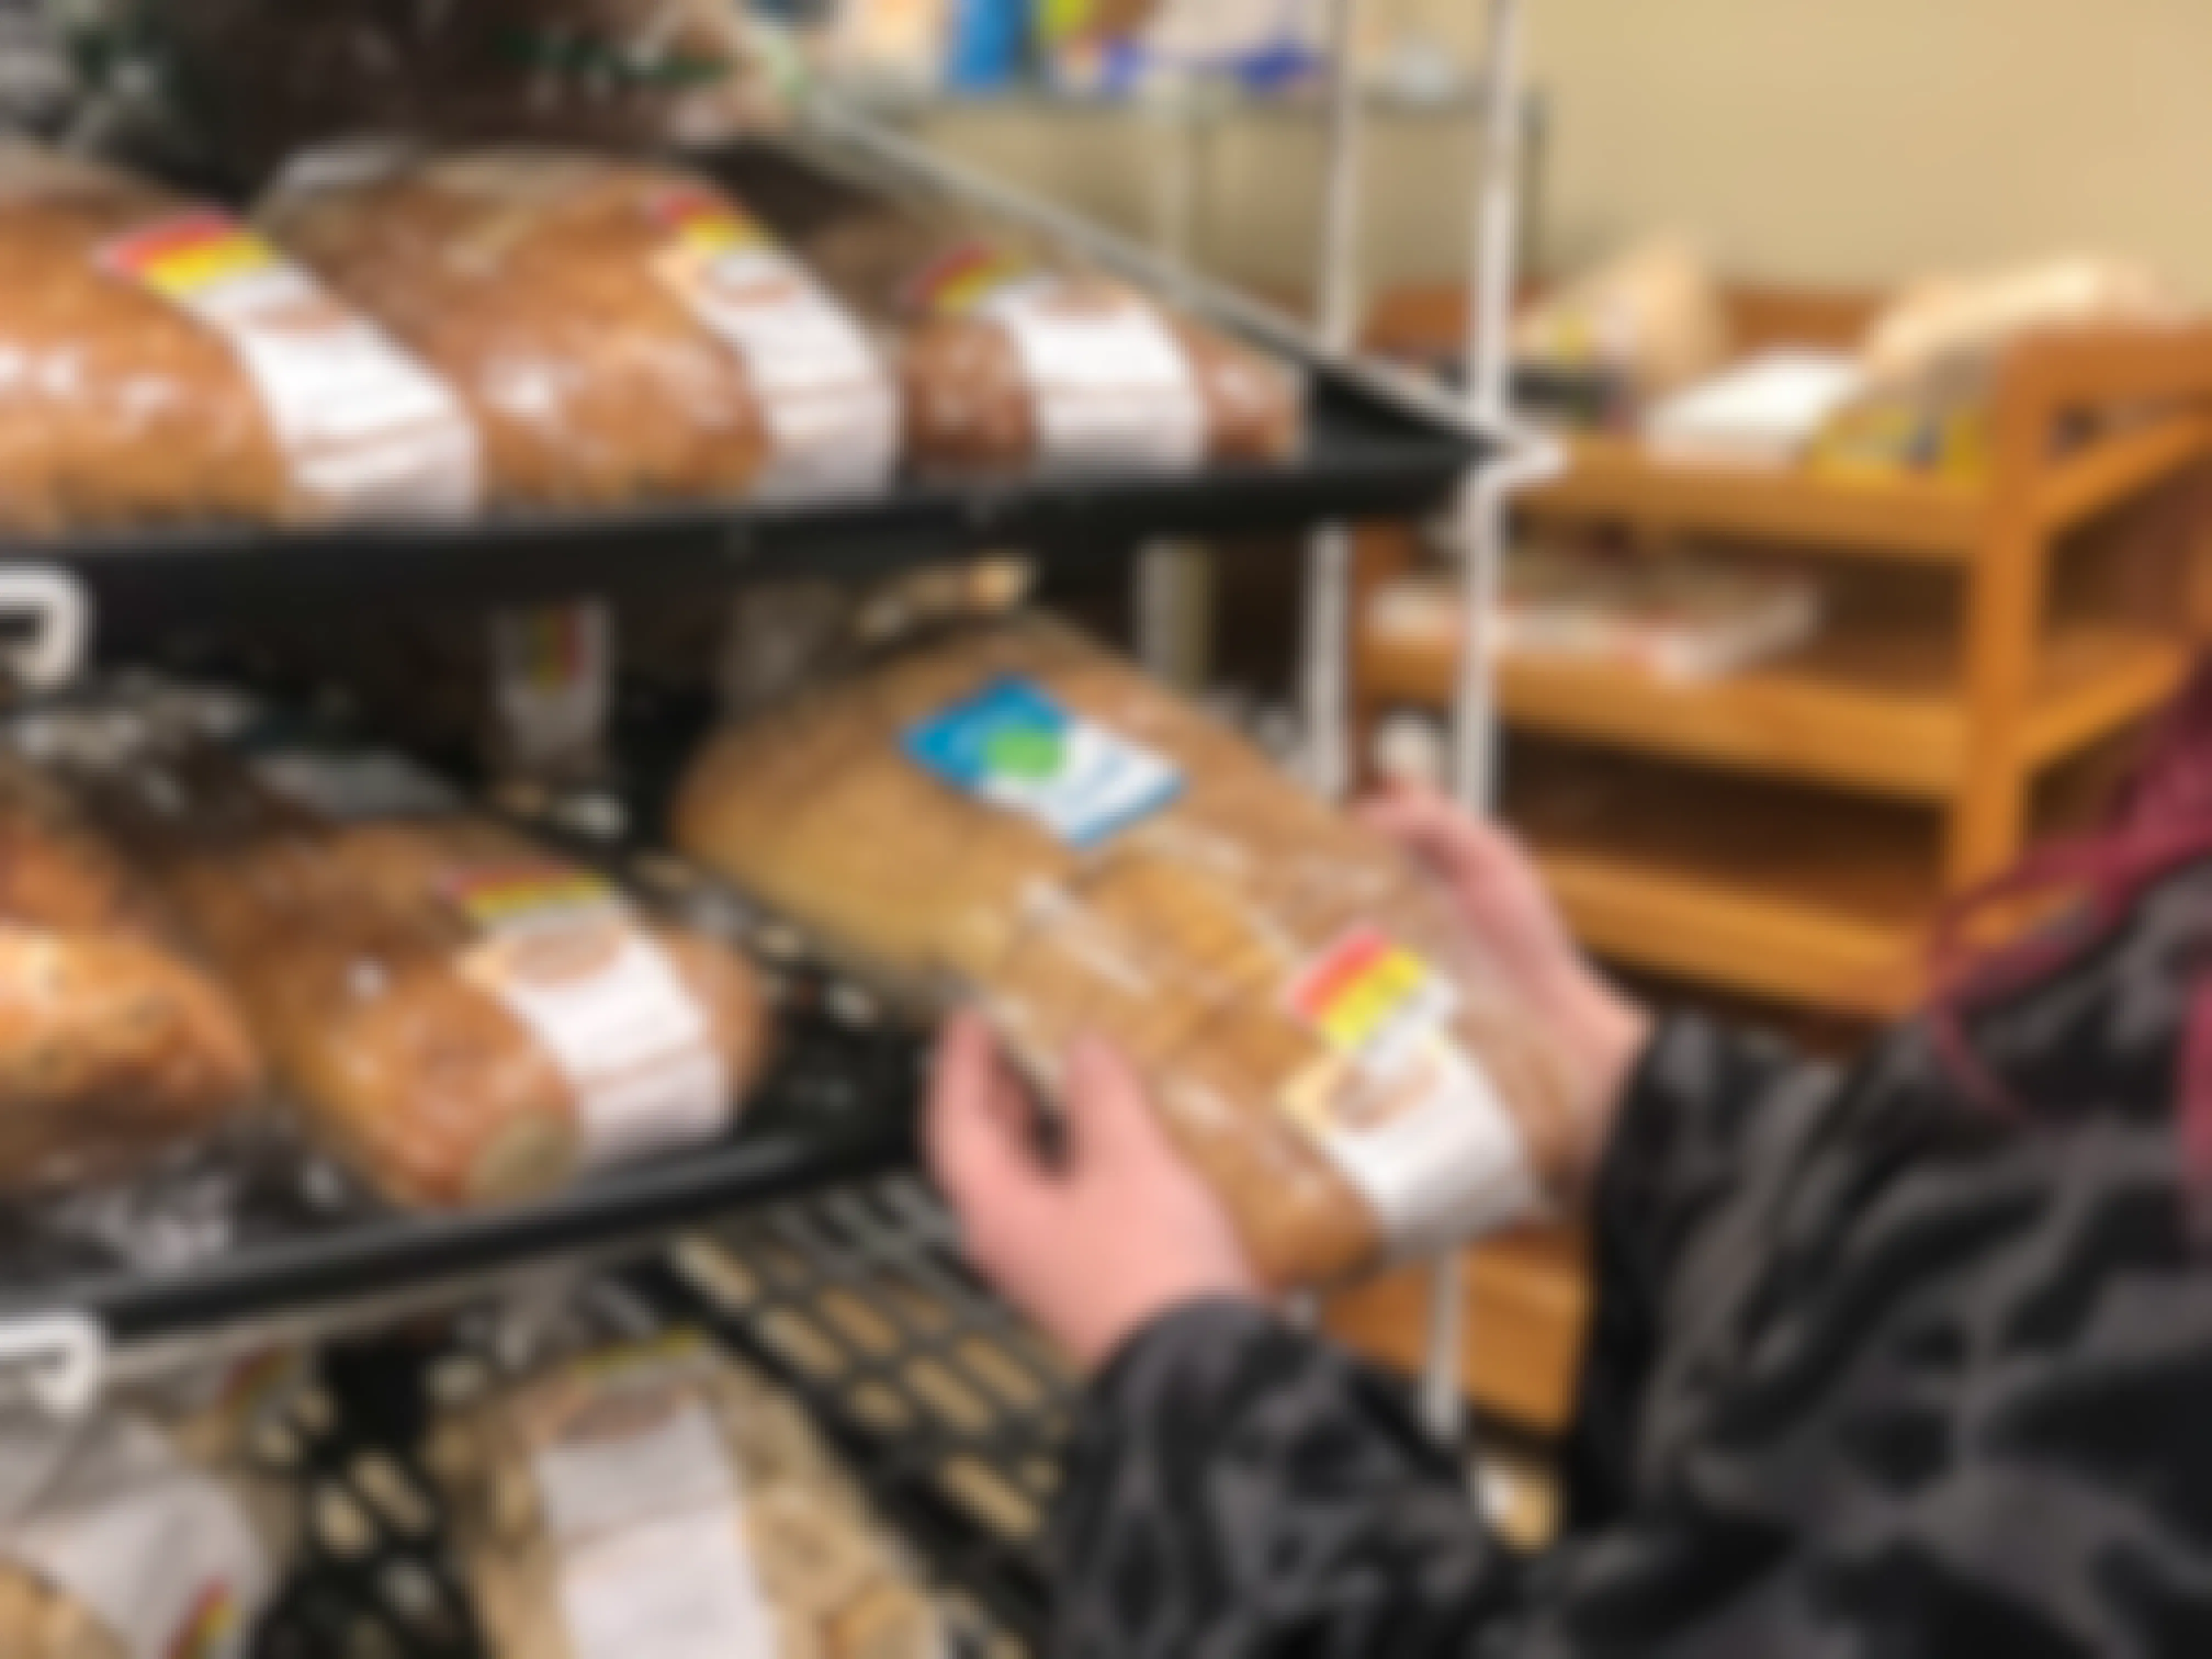 A woman shops for bread in the clearance section.